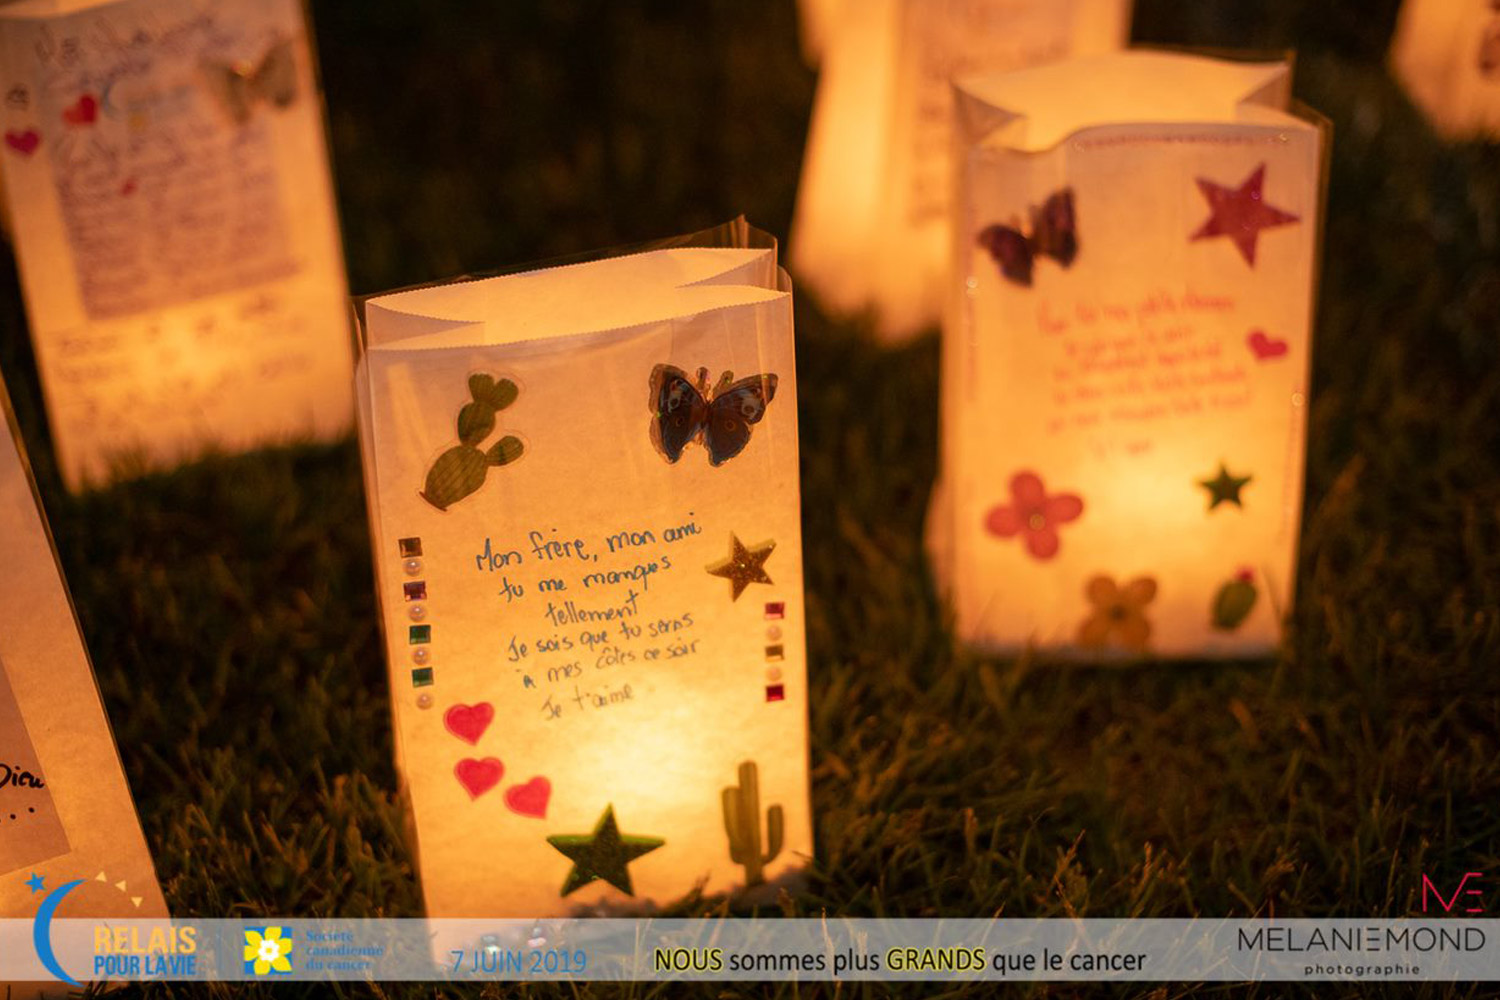 Glowing luminaries sit on the ground with written messages on them.